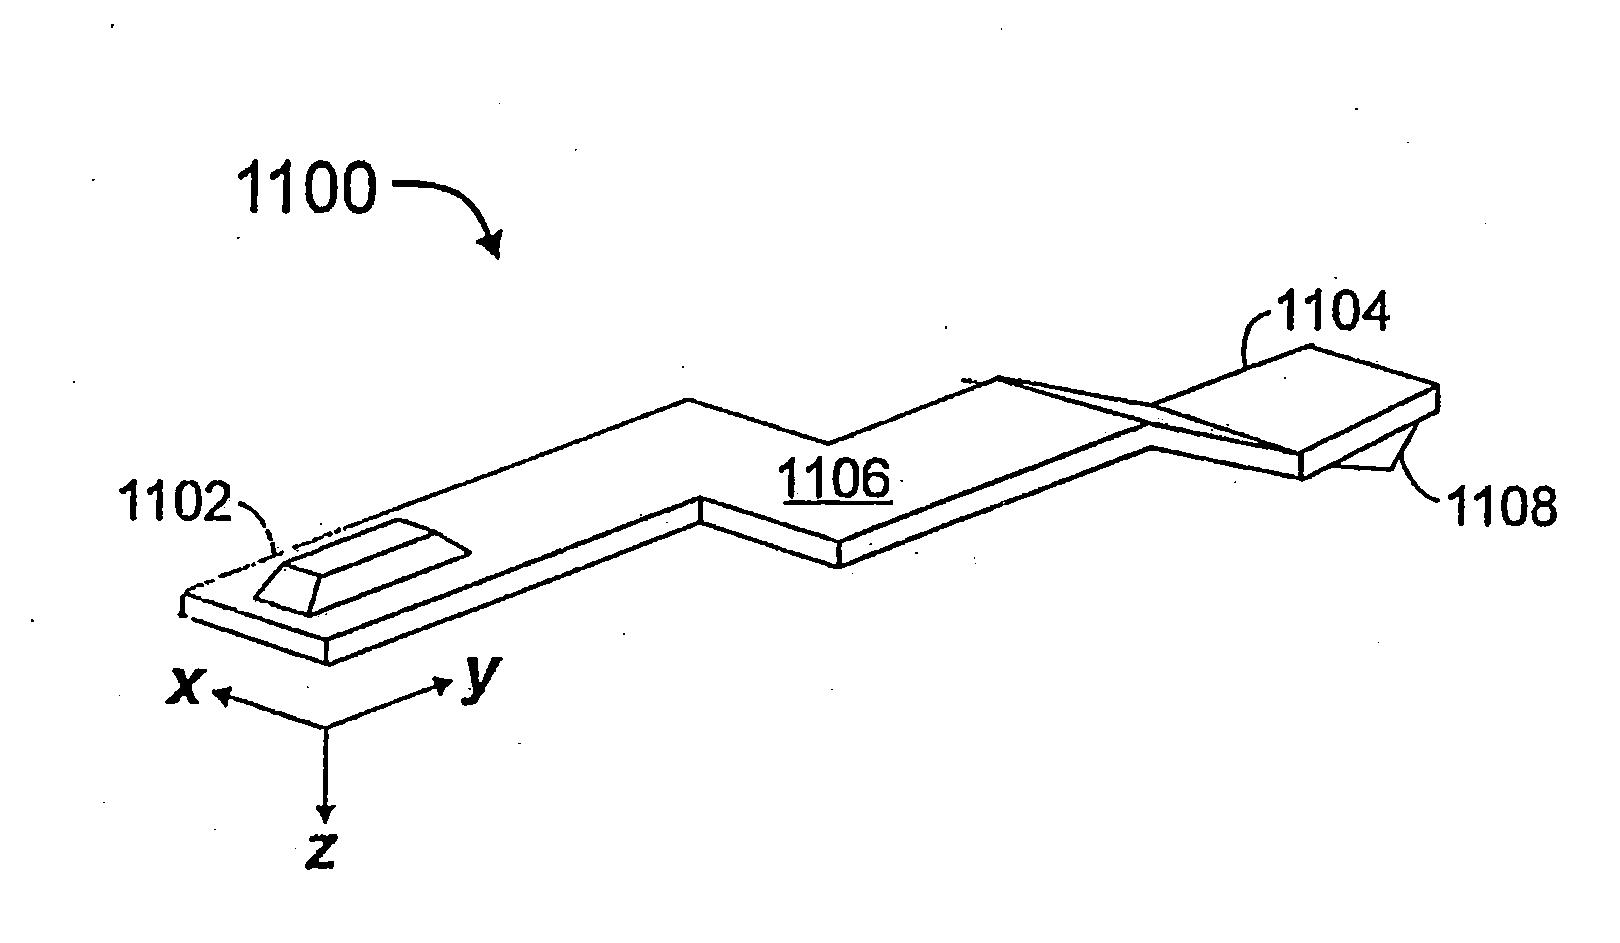 Contact tip structure for microelectronic interconnection elements and methods of making same